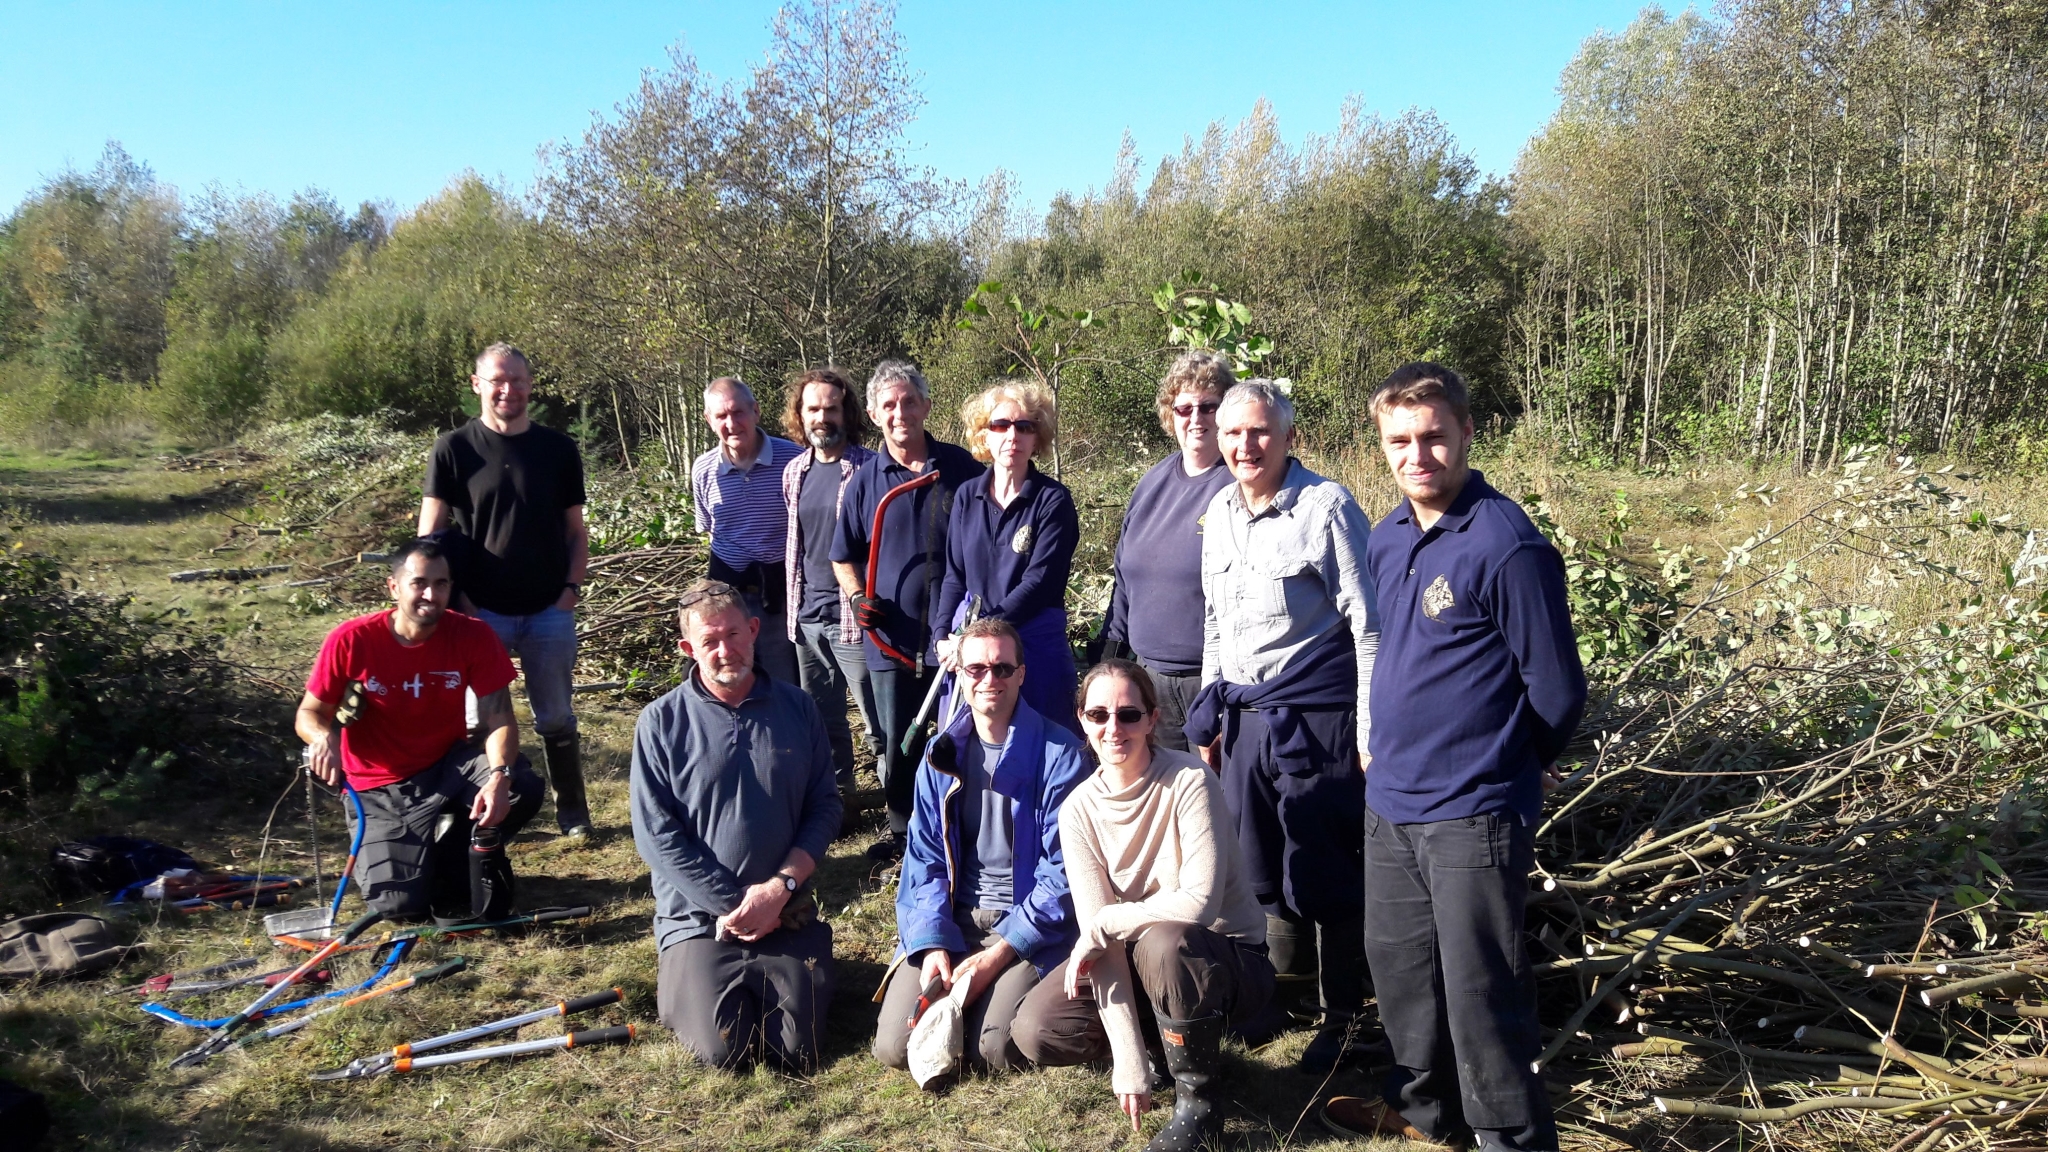 A photo from the FoTF Conservation Event - October 2018 - Undetaking clearance at the Lynford Lake Waters Edge : A team shot of the FoTF Conservation Group volunteers on the October 2018 event